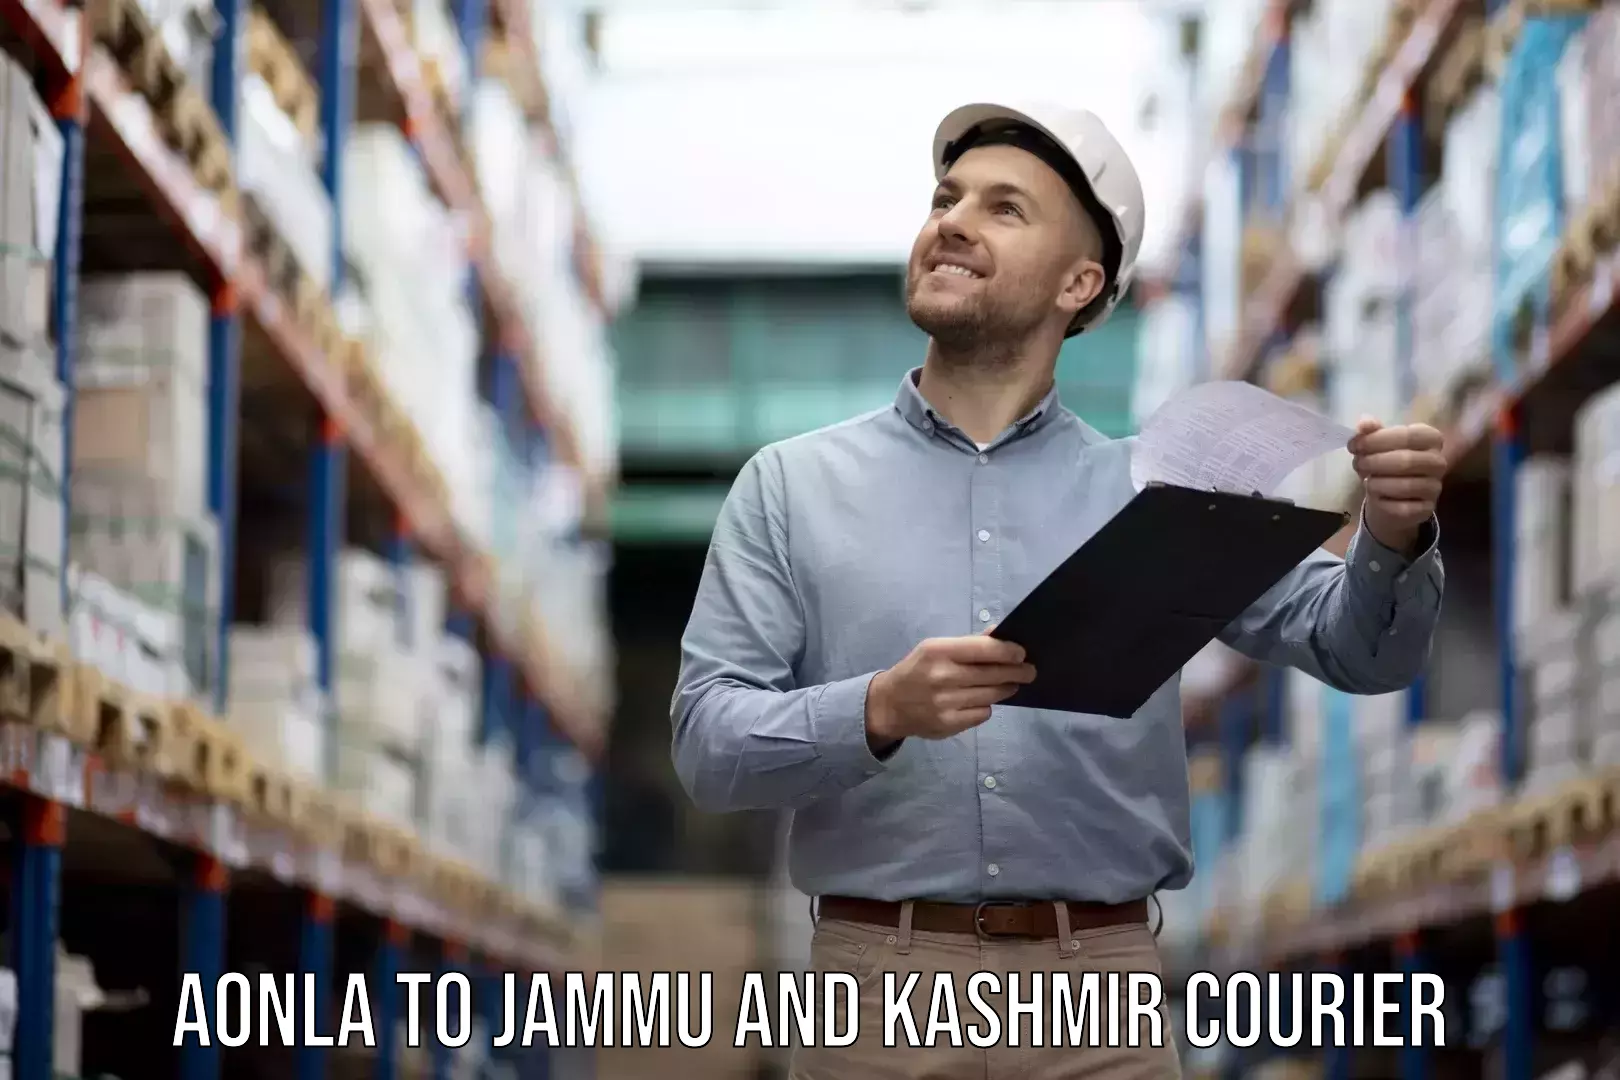 Home moving experts Aonla to Jammu and Kashmir